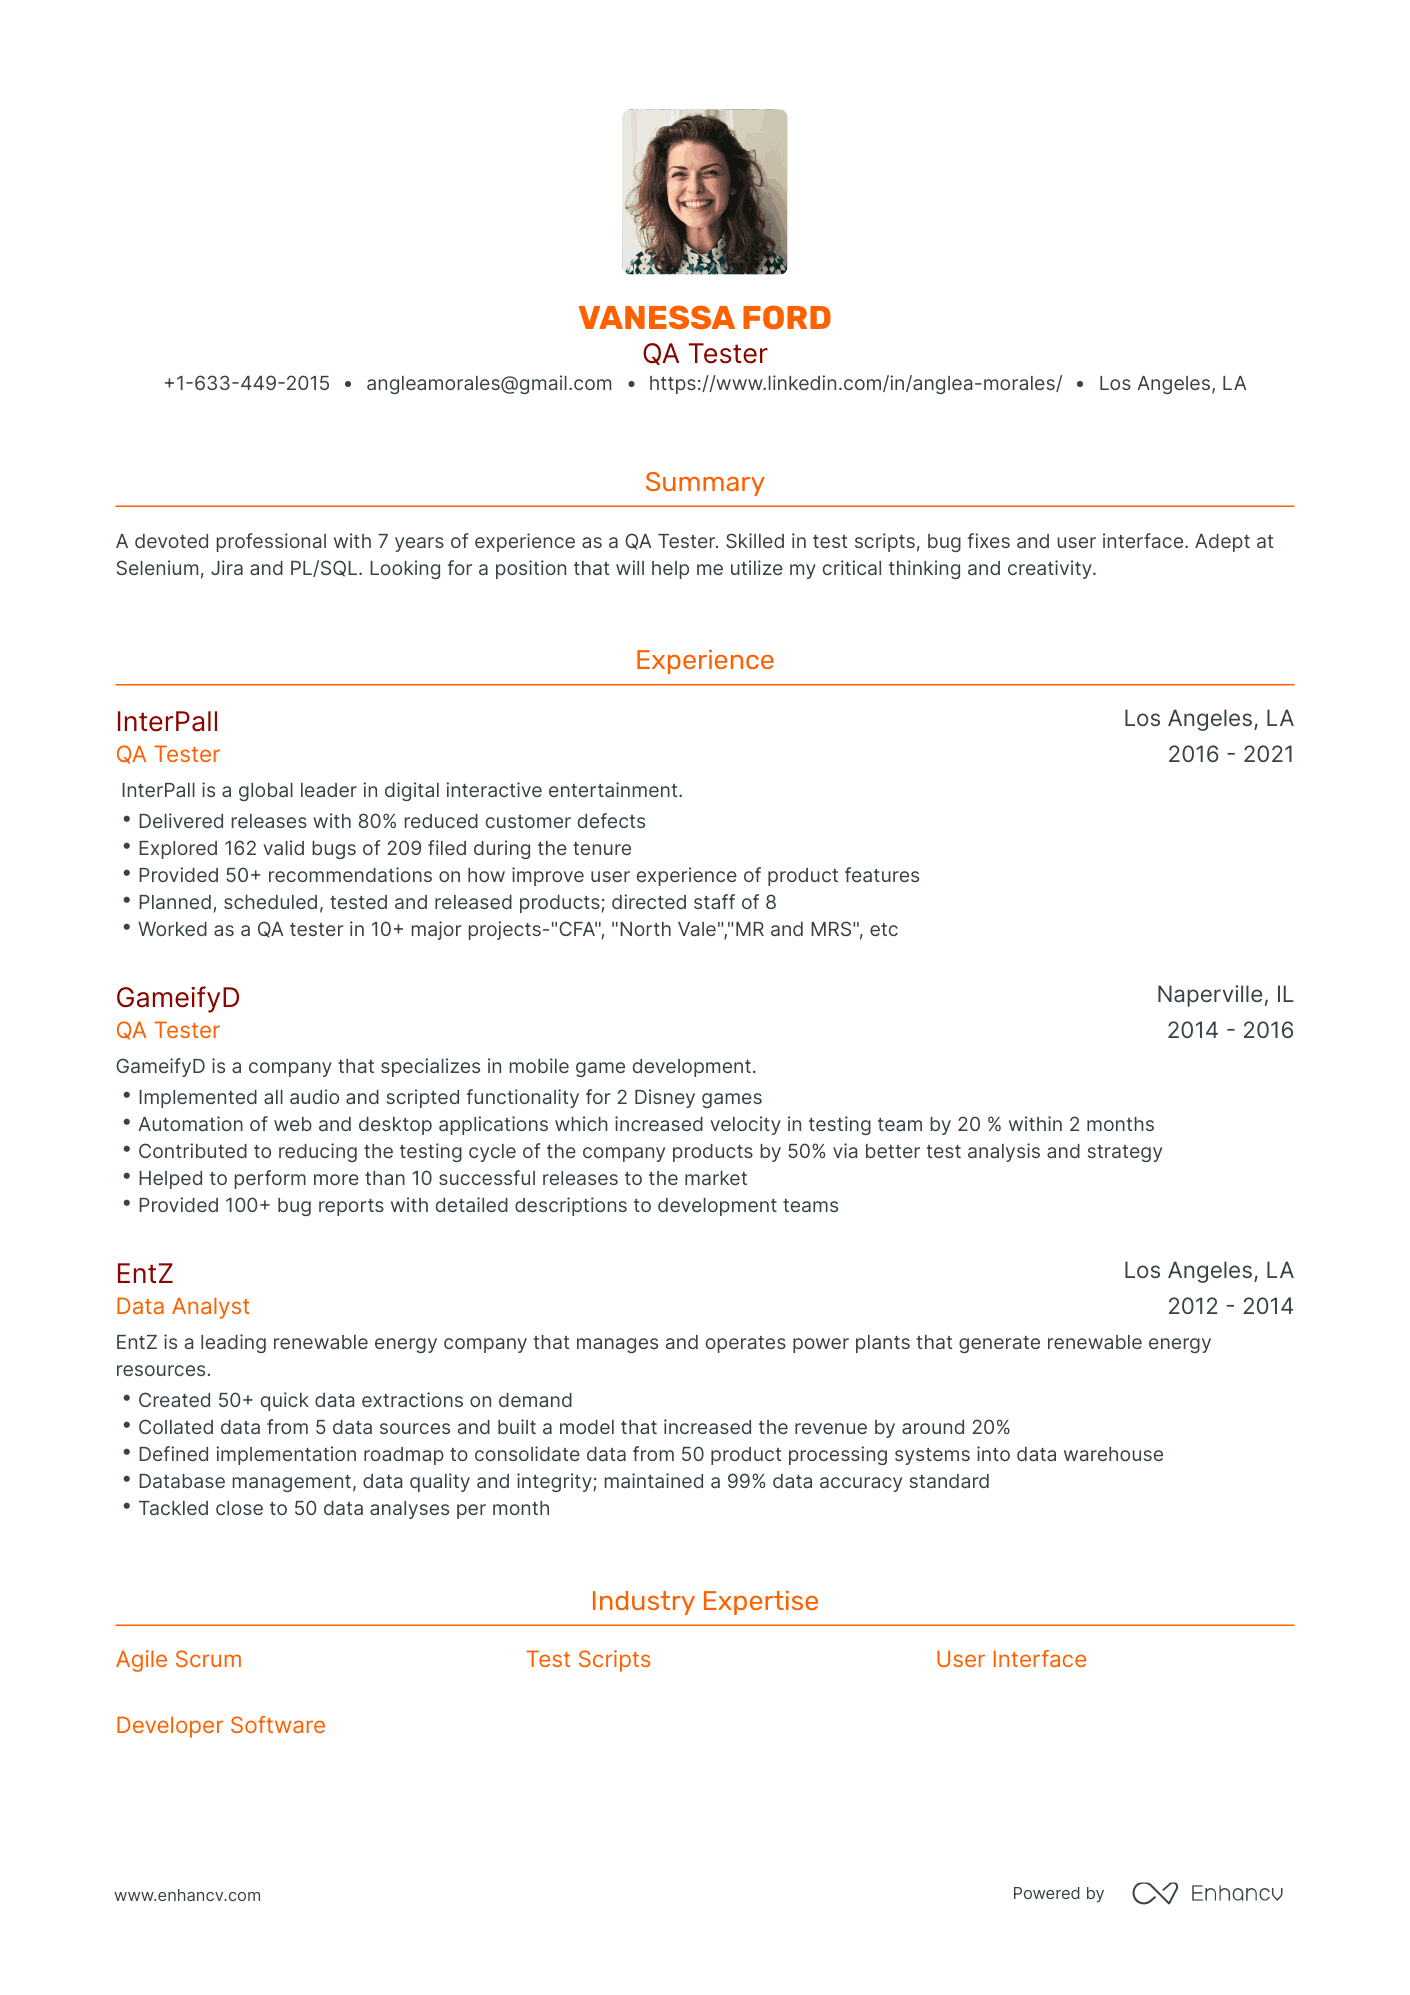 Traditional QA Tester Resume Template